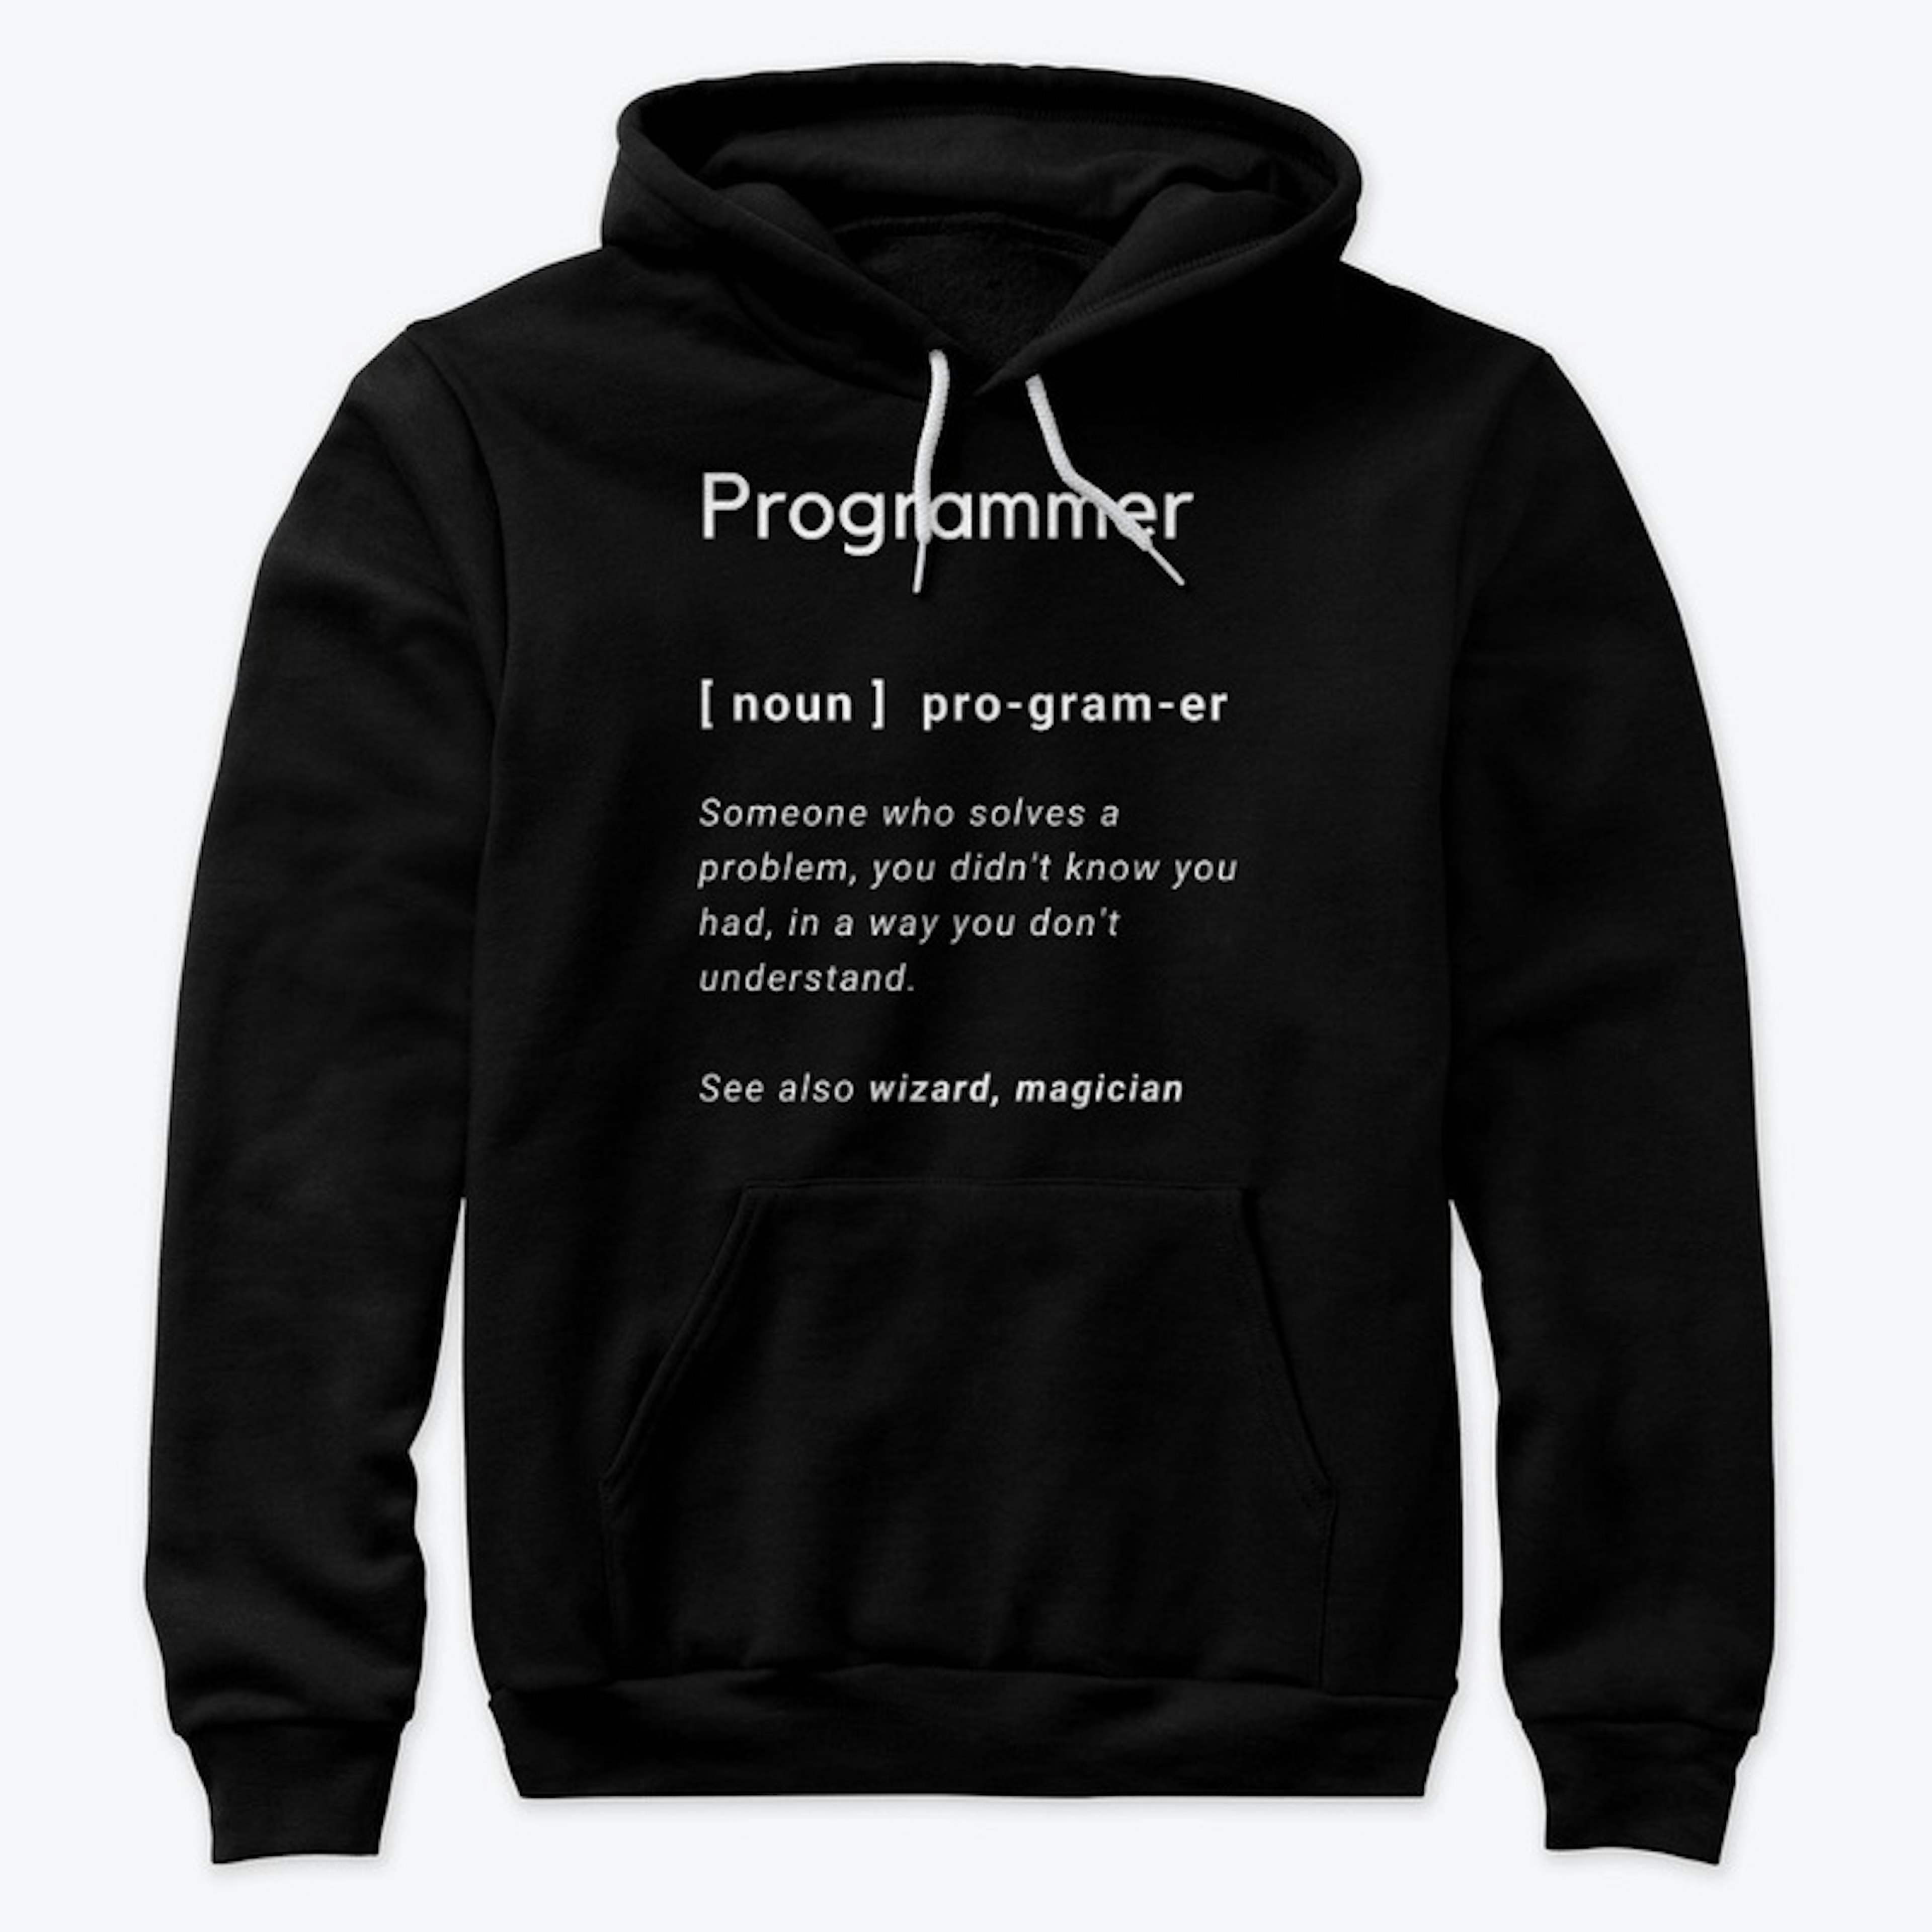 Programmer - meaning